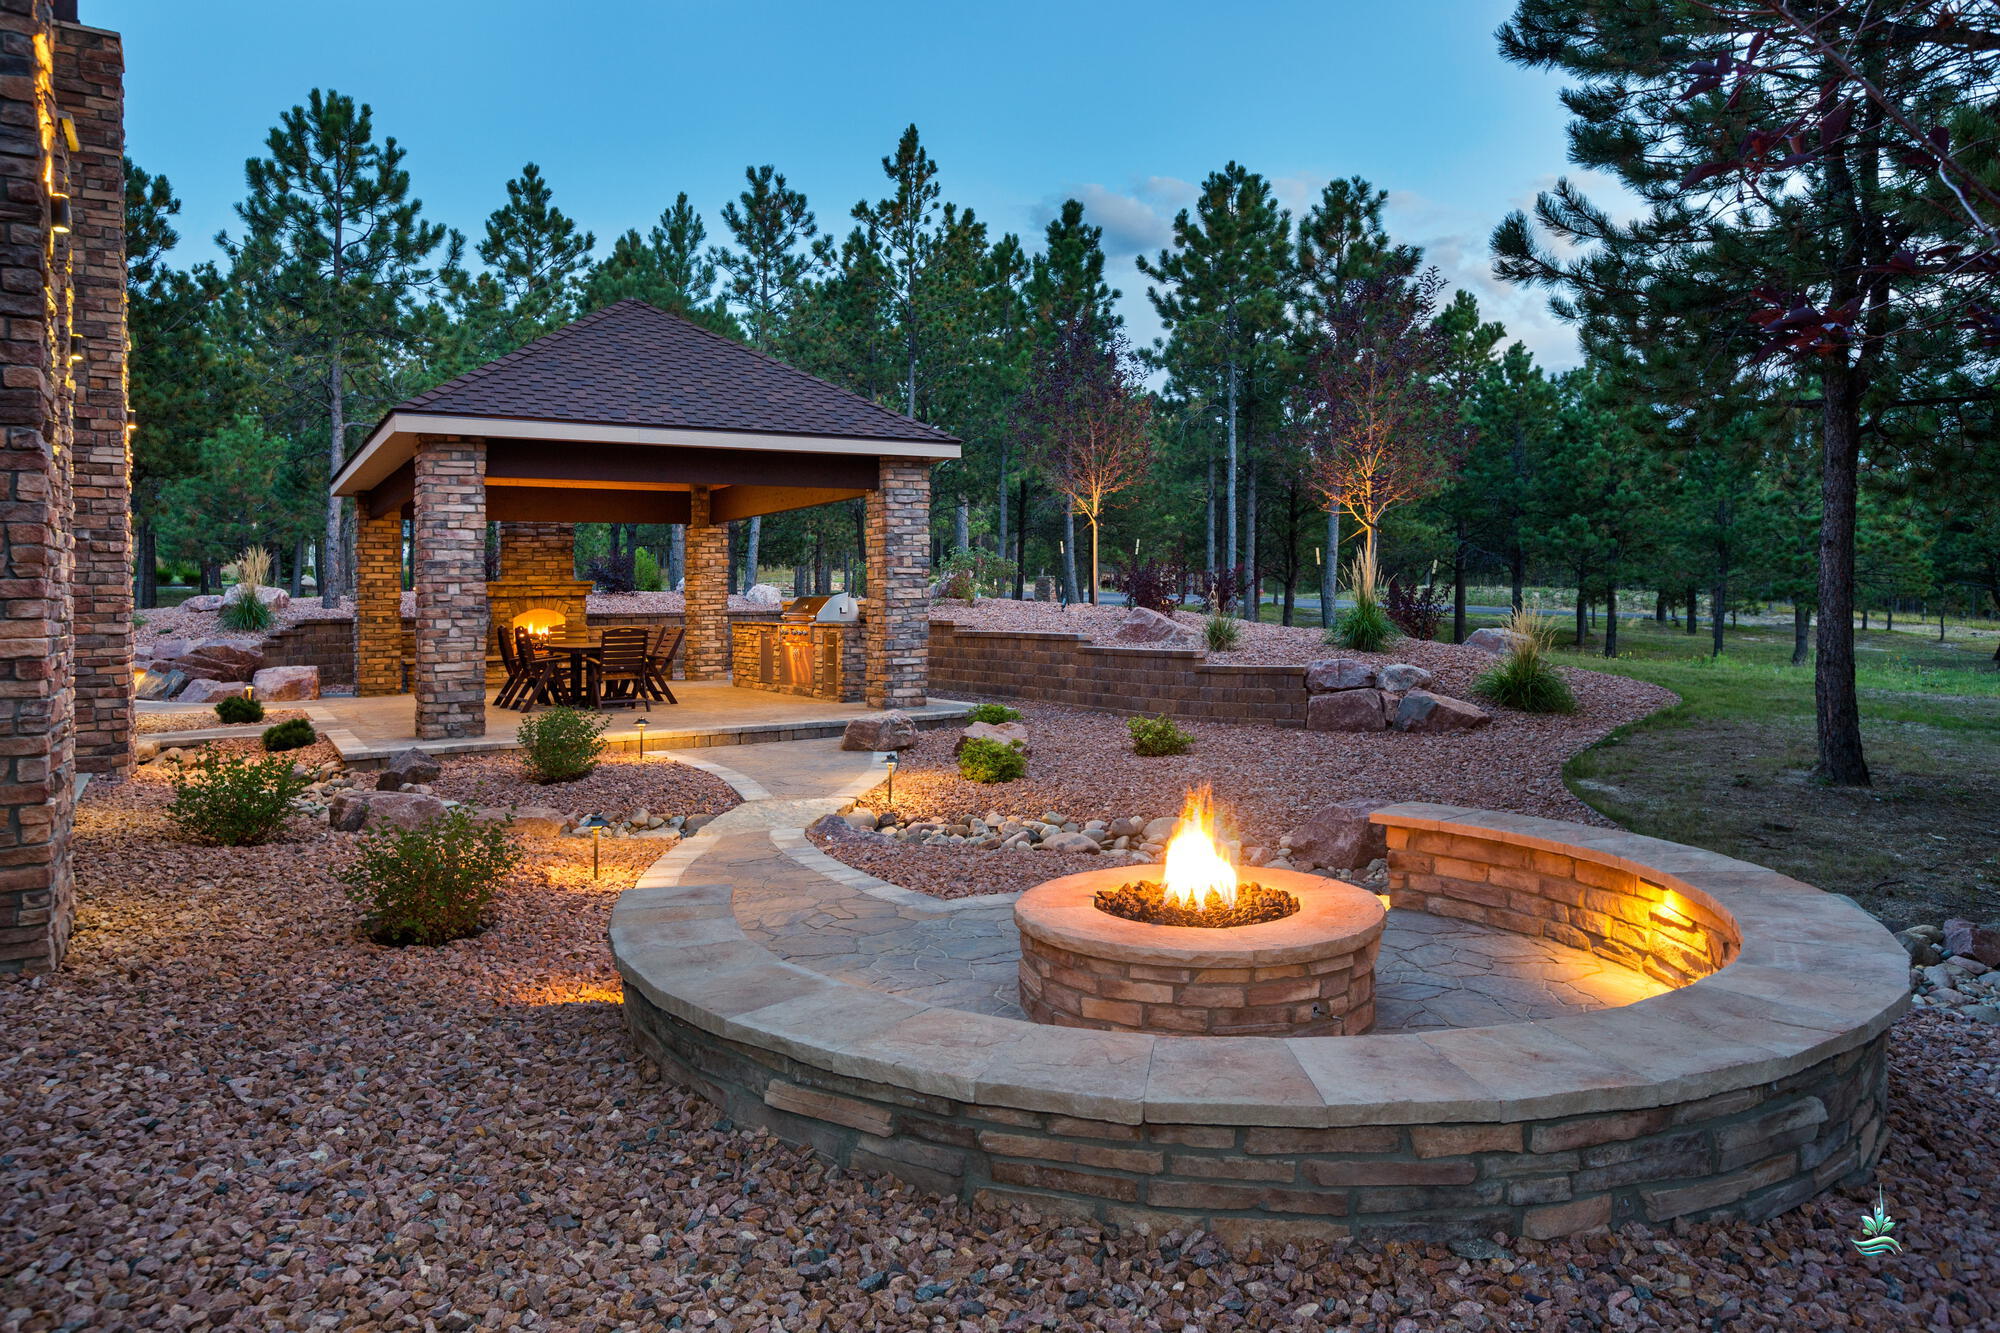 The warmth and ambiance of an outdoor fireplace will improve any outdoor living scenario. The Pro’s at Selah will build yours in natural gas, propane, or wood-burning, but that’s just the beginning. A big picture design with fire features that include a fireplace sets the stage for a fantastic build. Your Design Consultant will spark your imagination with all the possibilities we can deliver in your custom design.